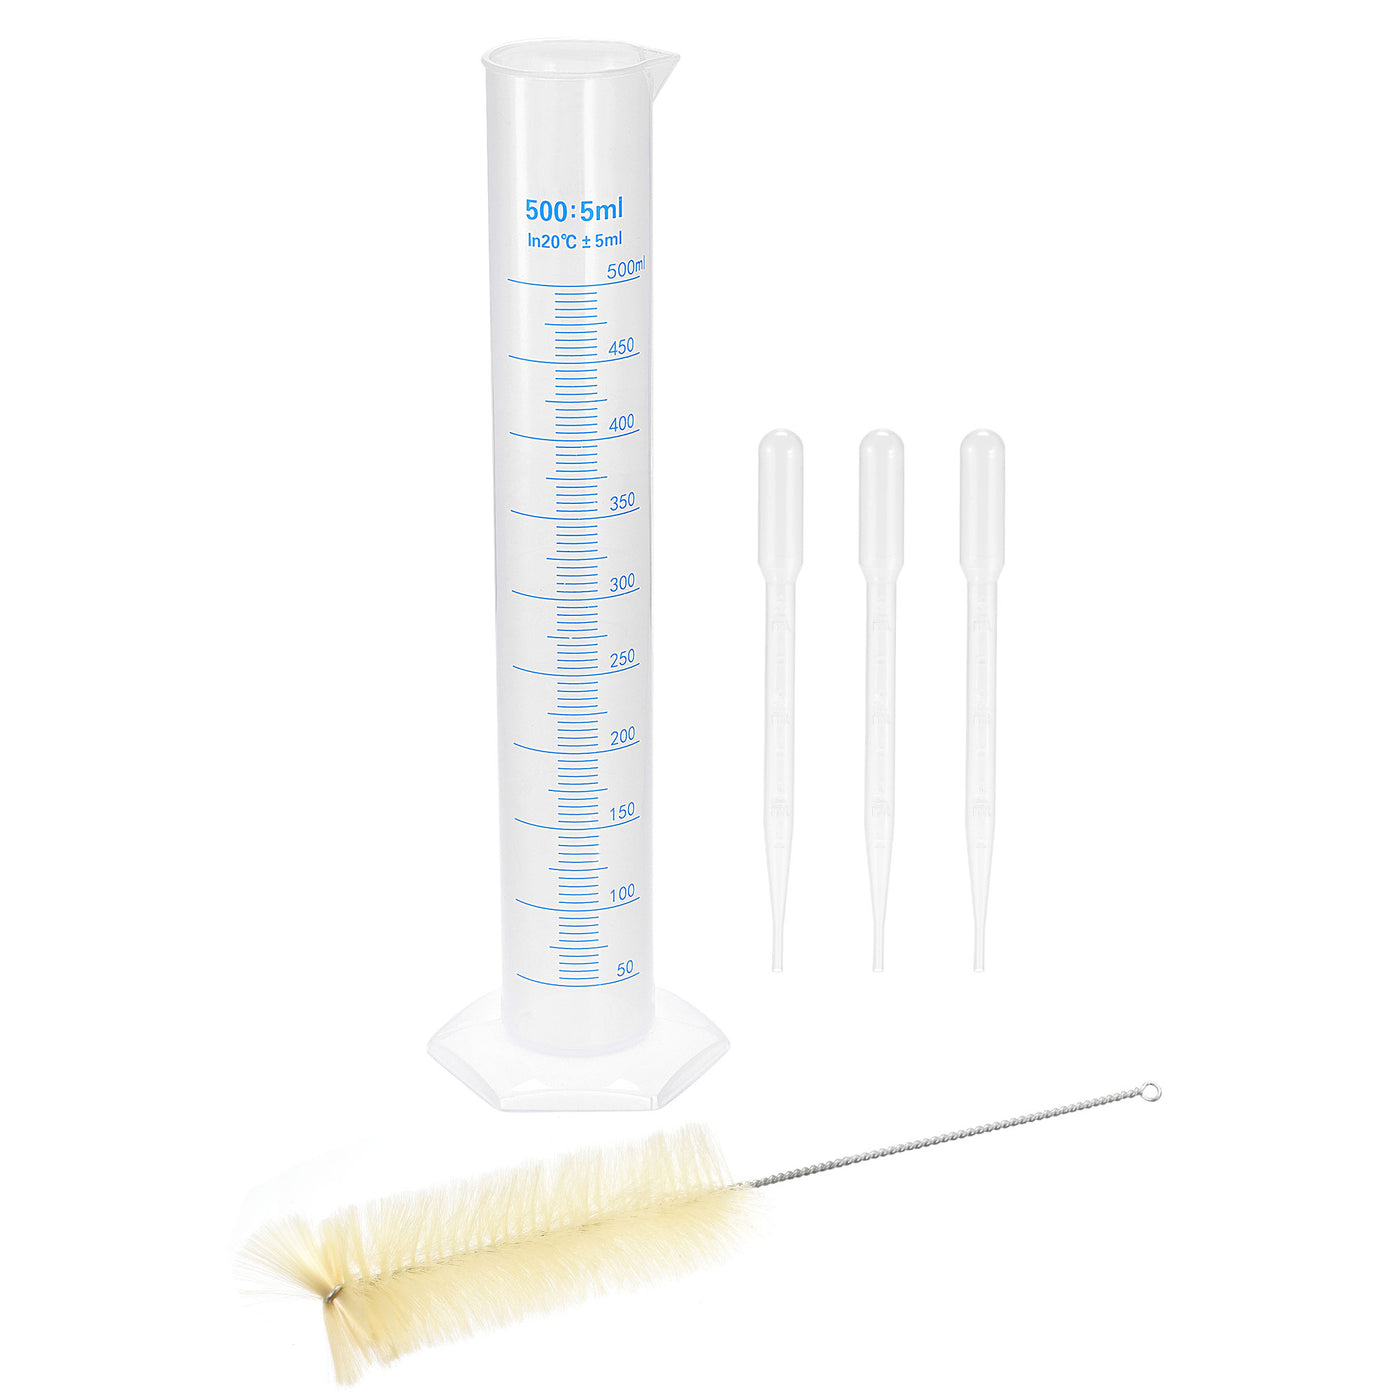 uxcell Uxcell Plastic Graduated Cylinder, 500ml Measuring Cylinder with 3 Transfer Pipettes and 1 Brush, 5in1 Set for Science Lab